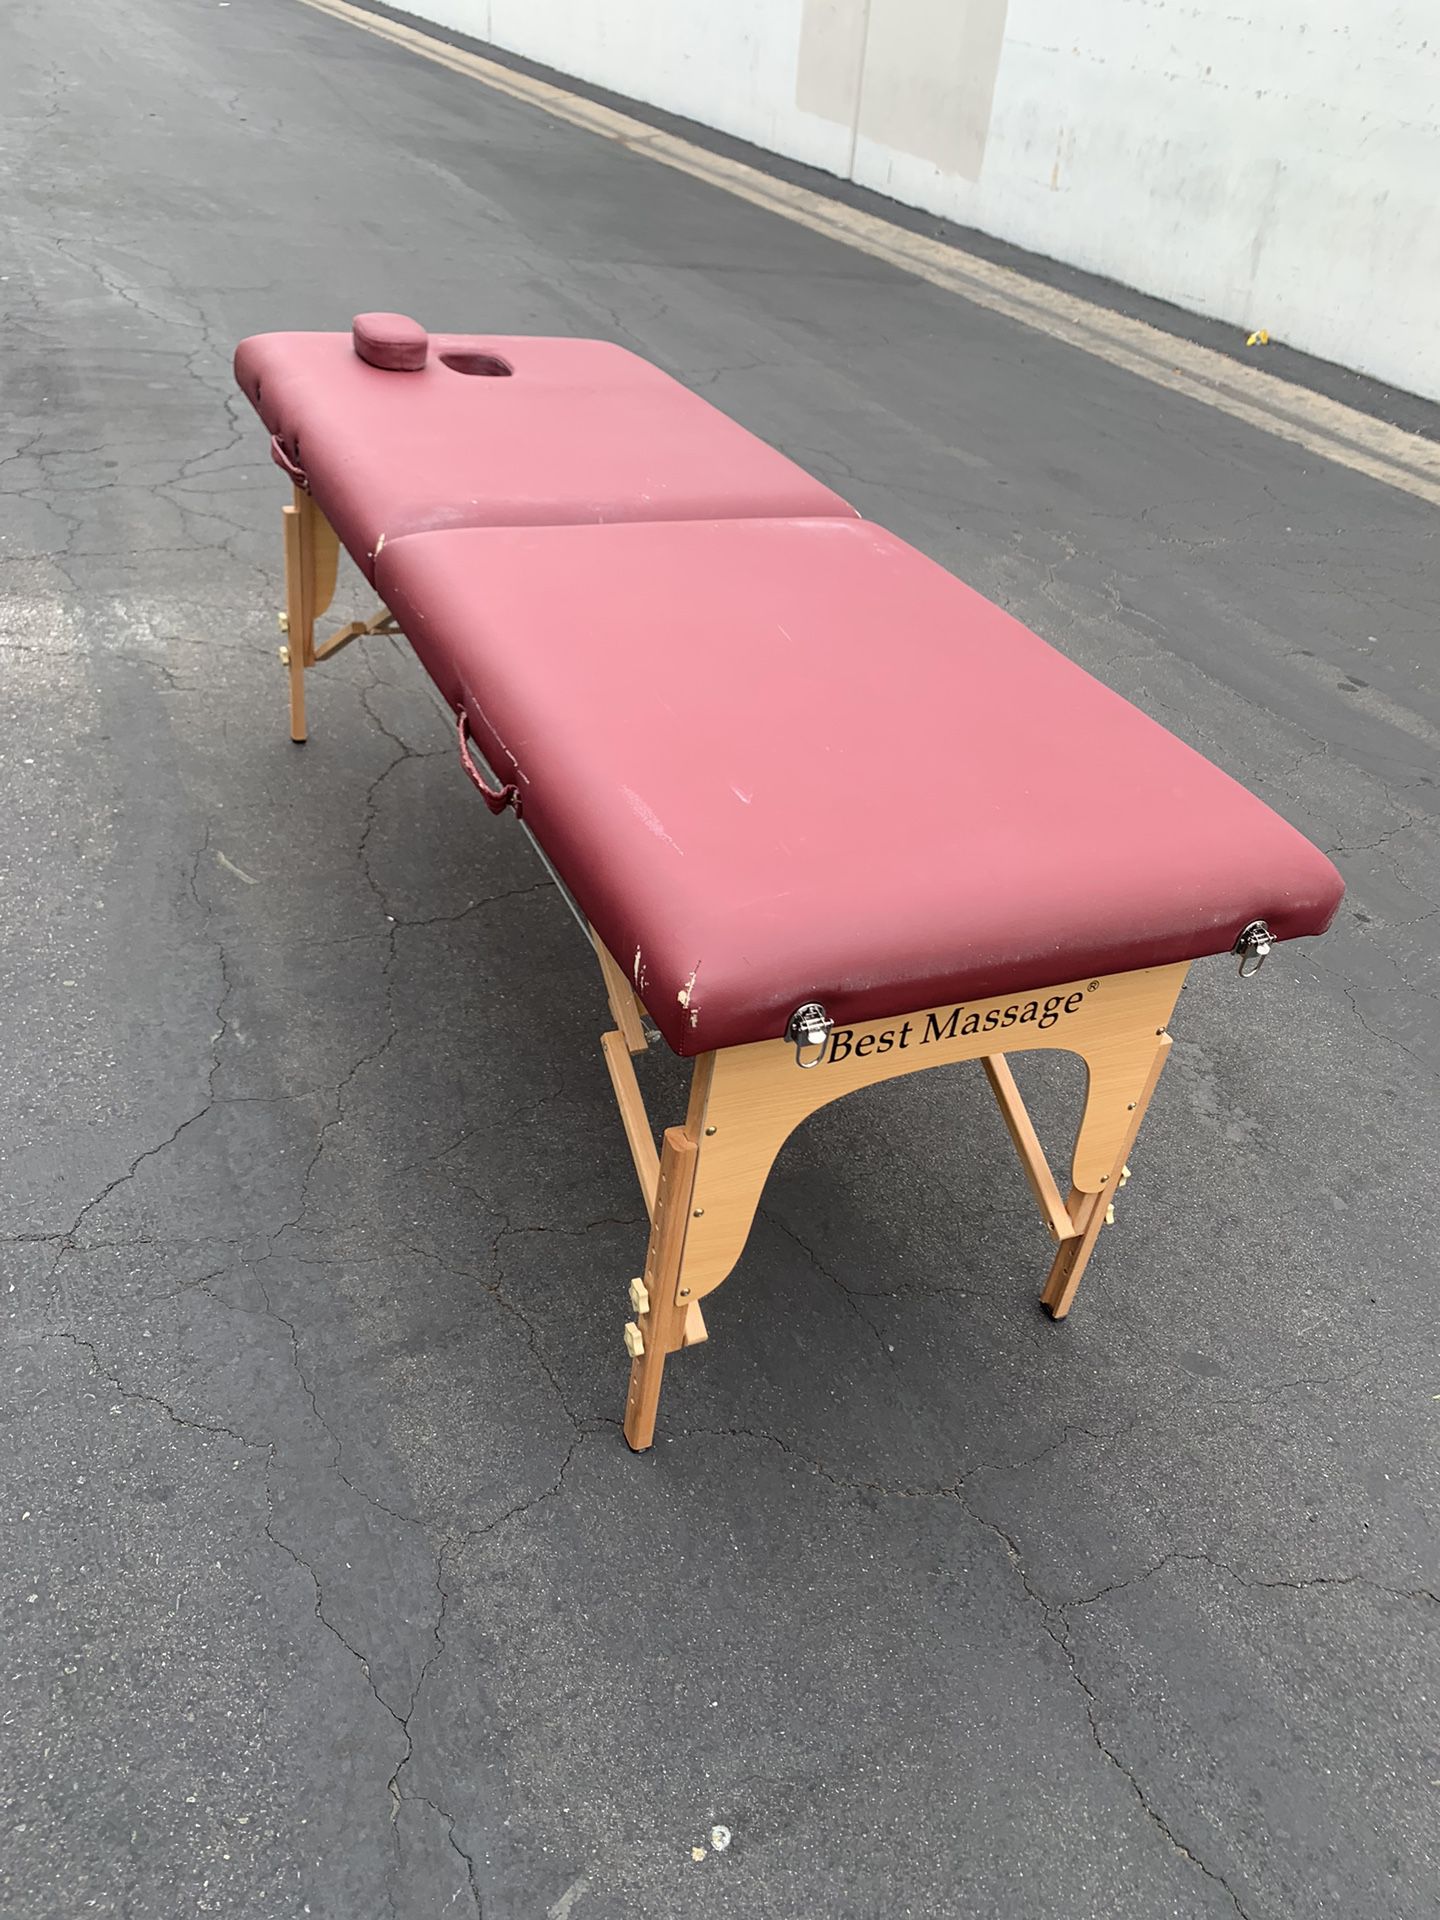 Best Massage Two Fold Portable Height Adjustable Massage Table